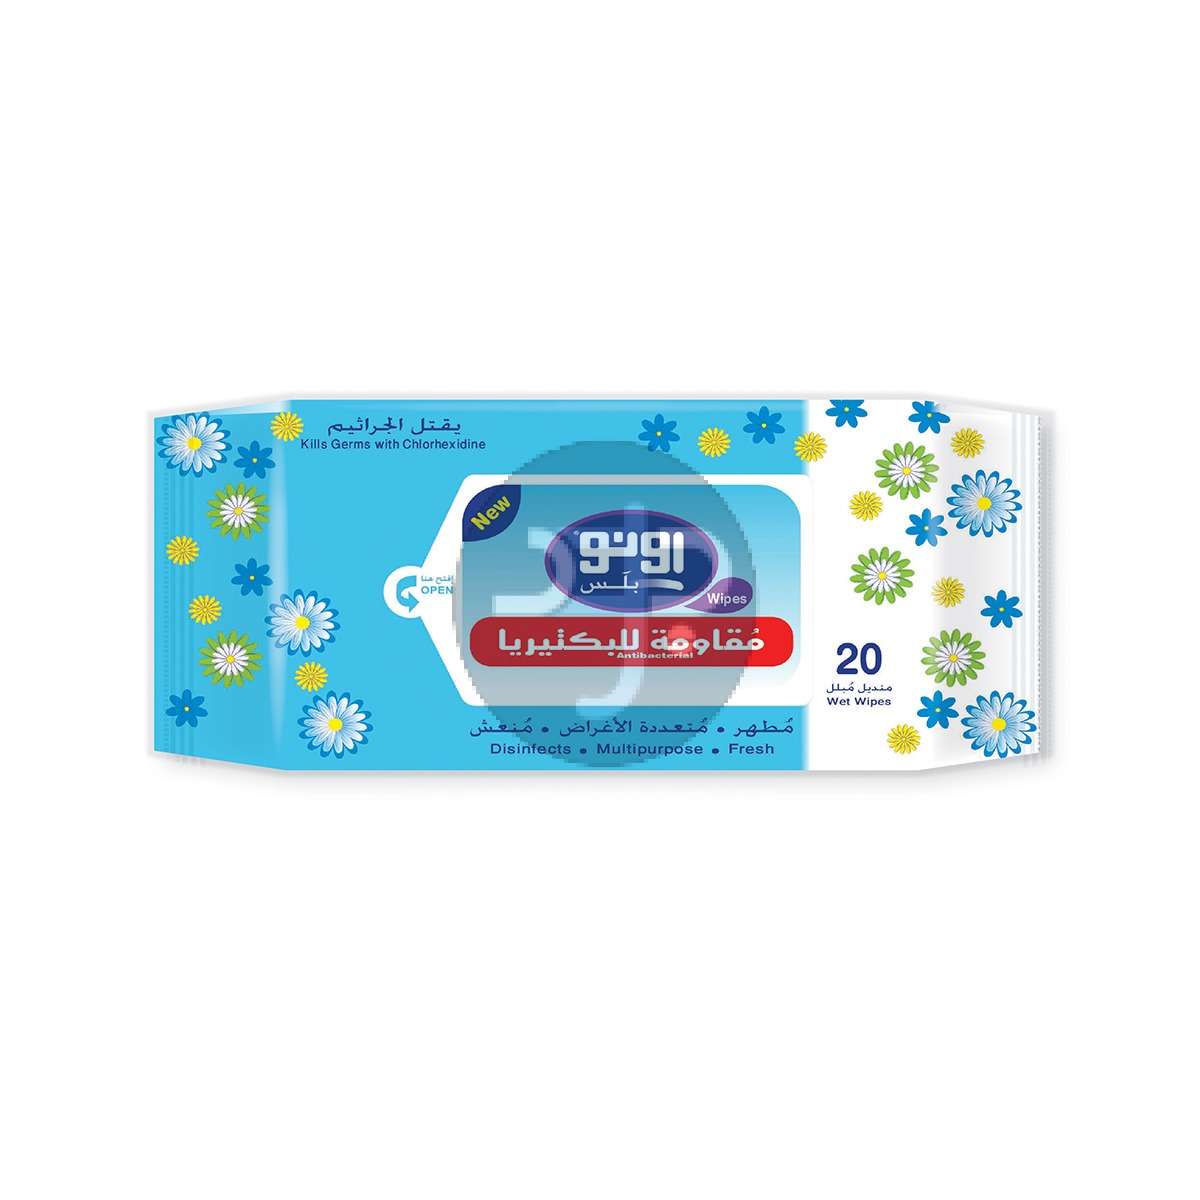 Product-UNO Plus Anti-Bacterial All Purpose Wet Wipes, Pack of 20 Wipes